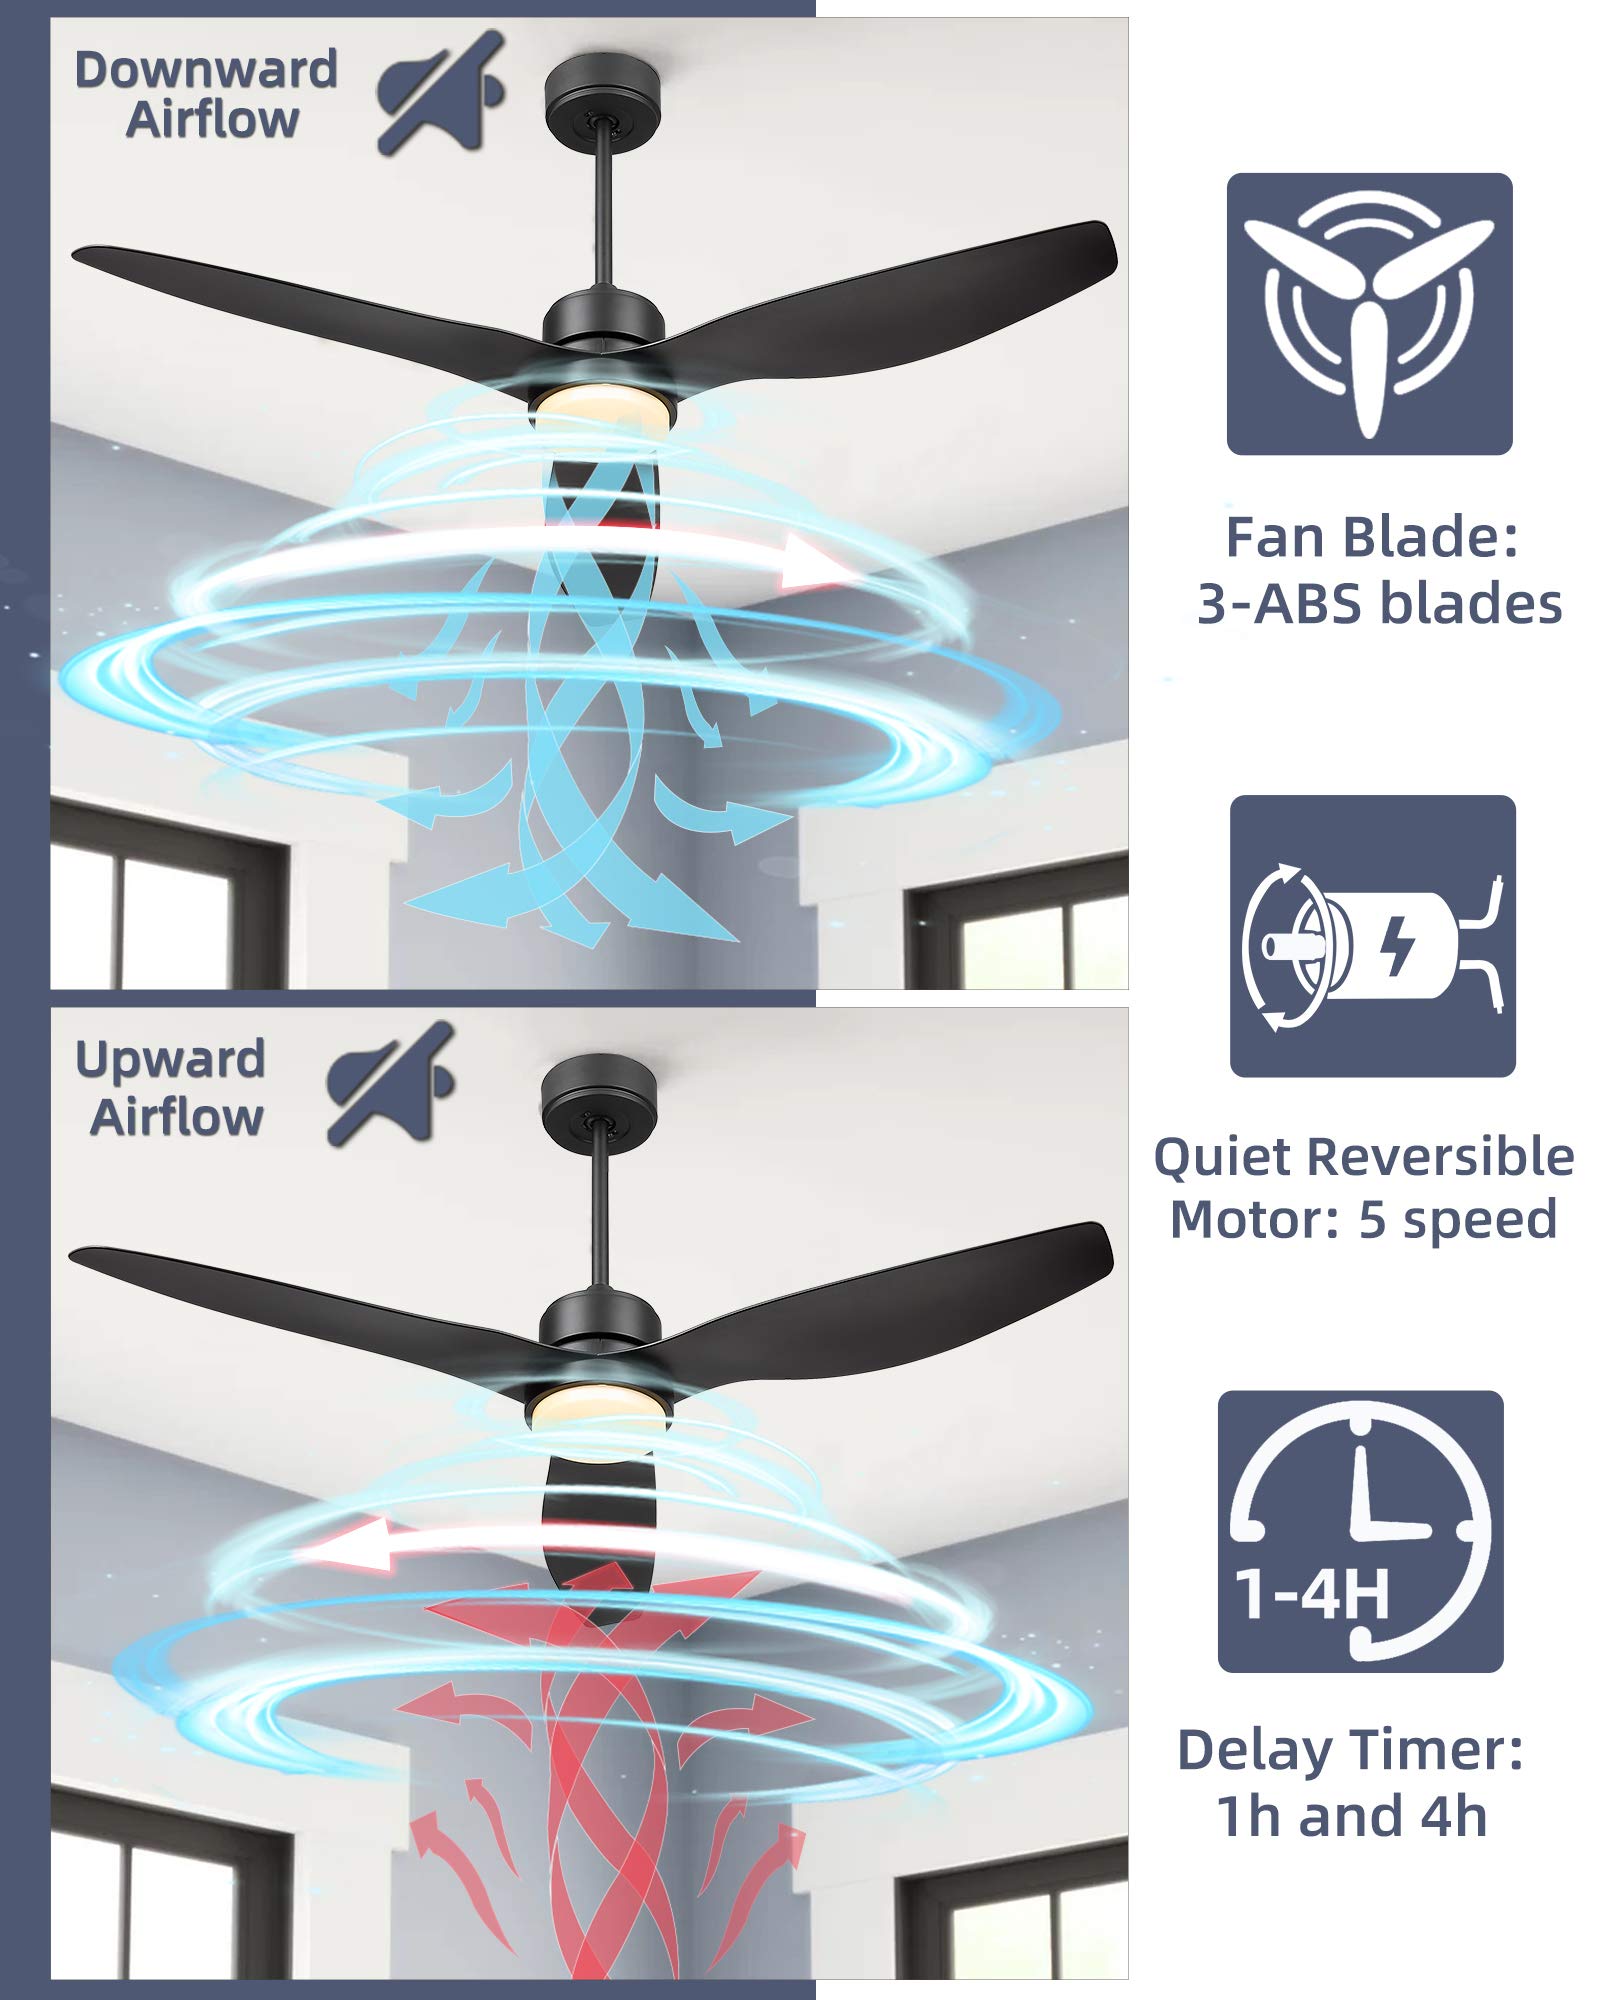 YOUKAIN 52 Inch Indoor/Outdoor Modern Ceiling Fan with Lights and Remote Control, Reversible Blades, for Living room, Bedroom, Bathroom, Matte Black, 52-YJ359-BK